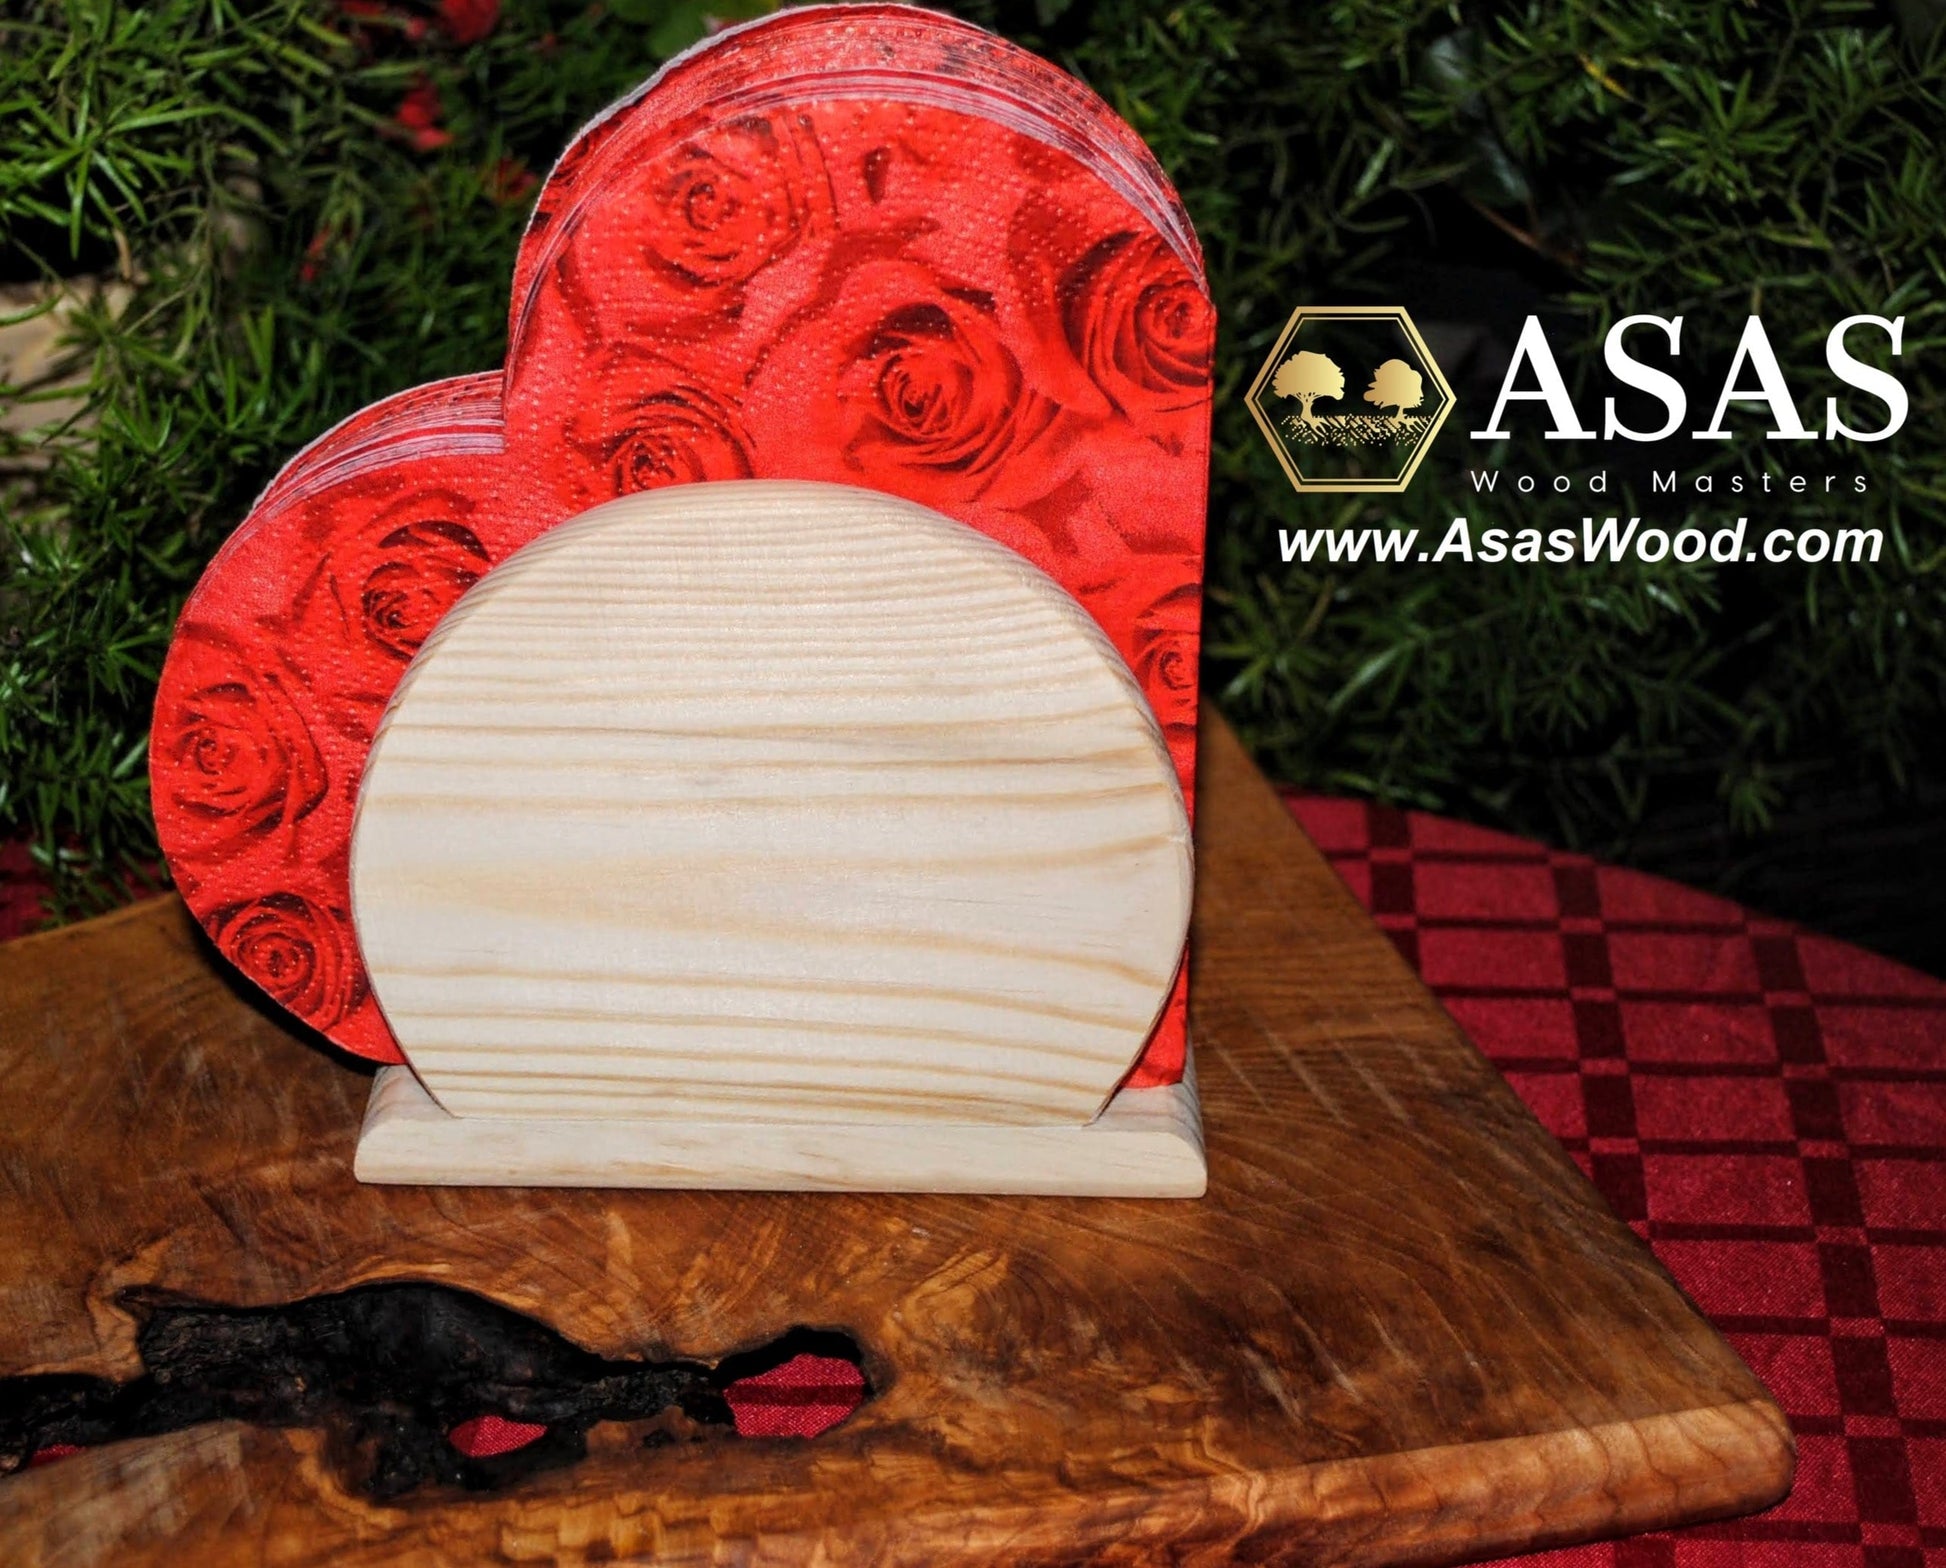 napkin holder wooden handmade with heart shape paper napkins on the table, made by asaswood